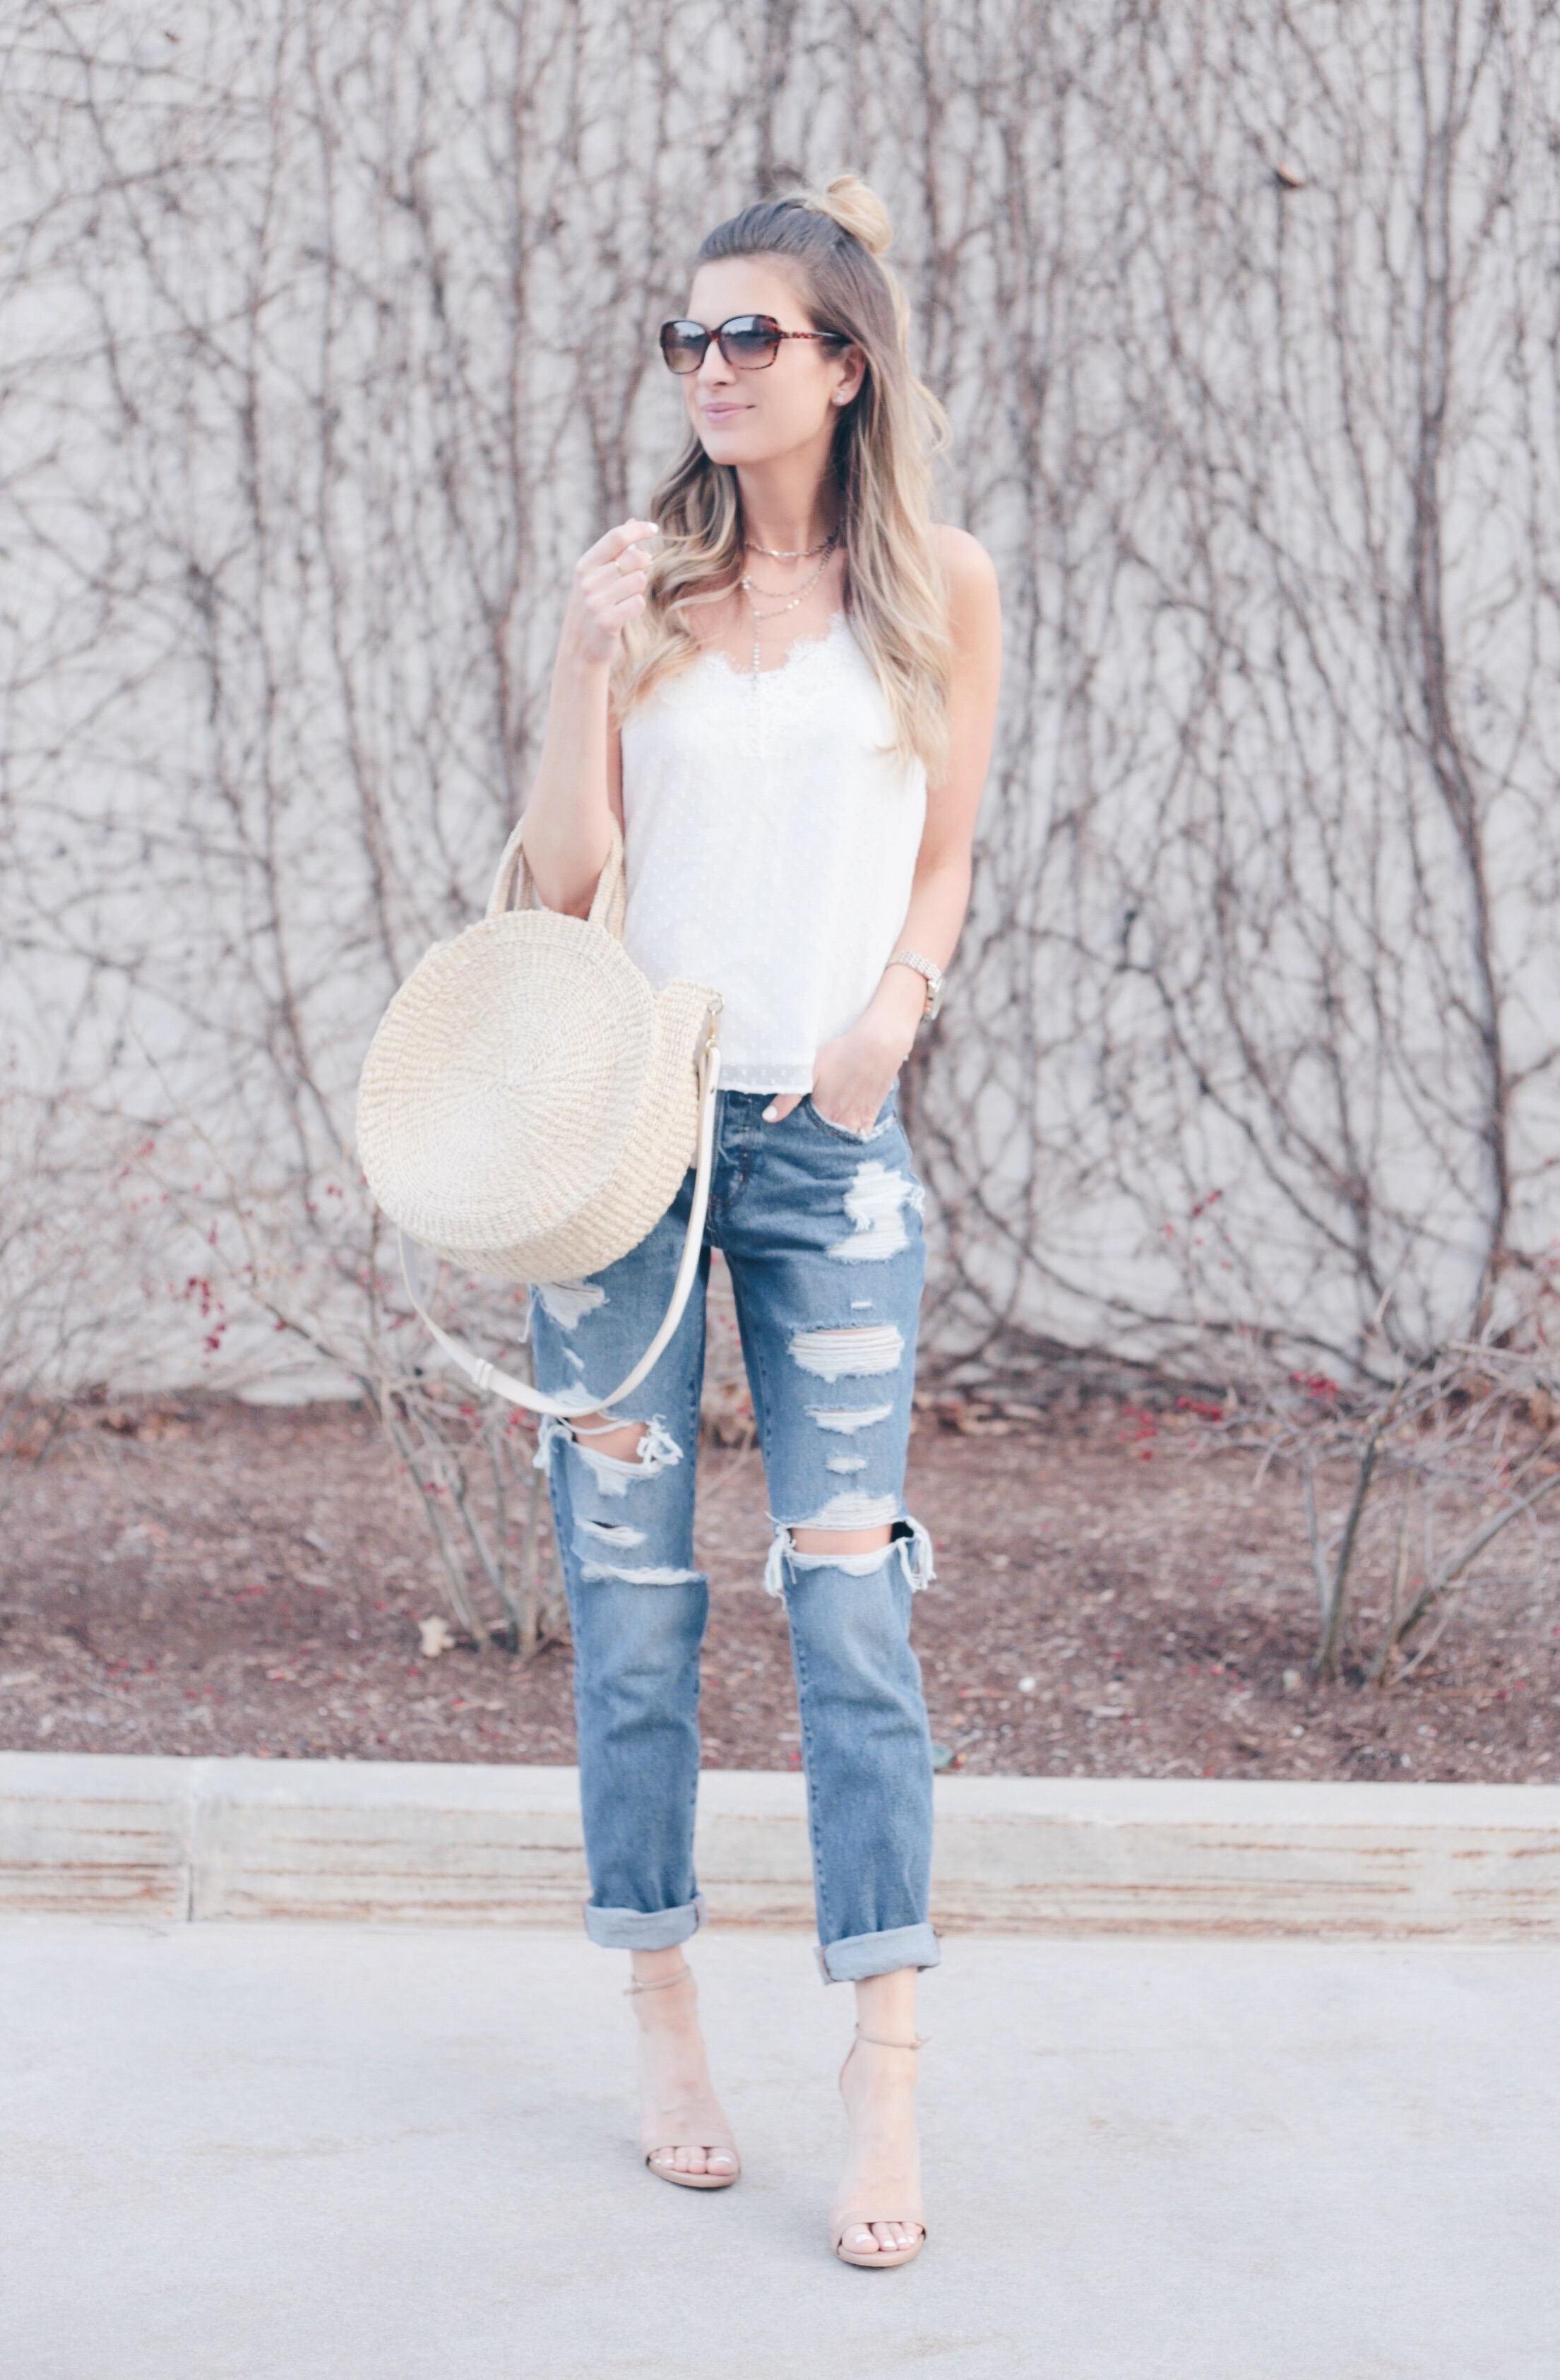 Spring Transition Outfits With Denim Boyfriend Jeans Outfit On Pinteresting Plans Pinteresting Plans